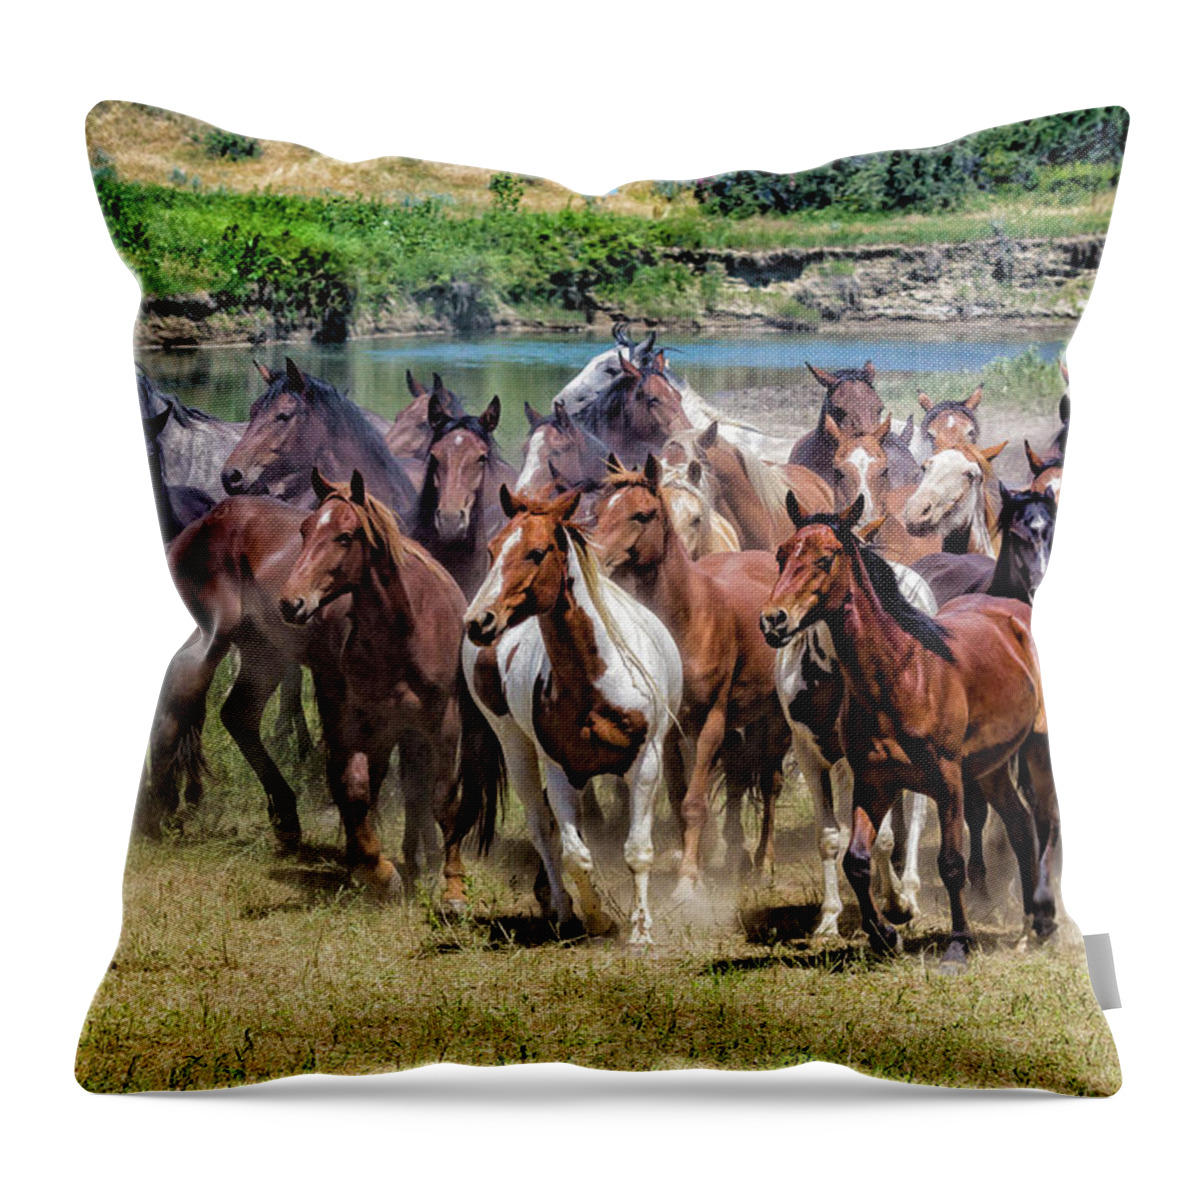 Little Bighorn Re-enactment Throw Pillow featuring the photograph Indian Horse Roundup 1 by Donald Pash